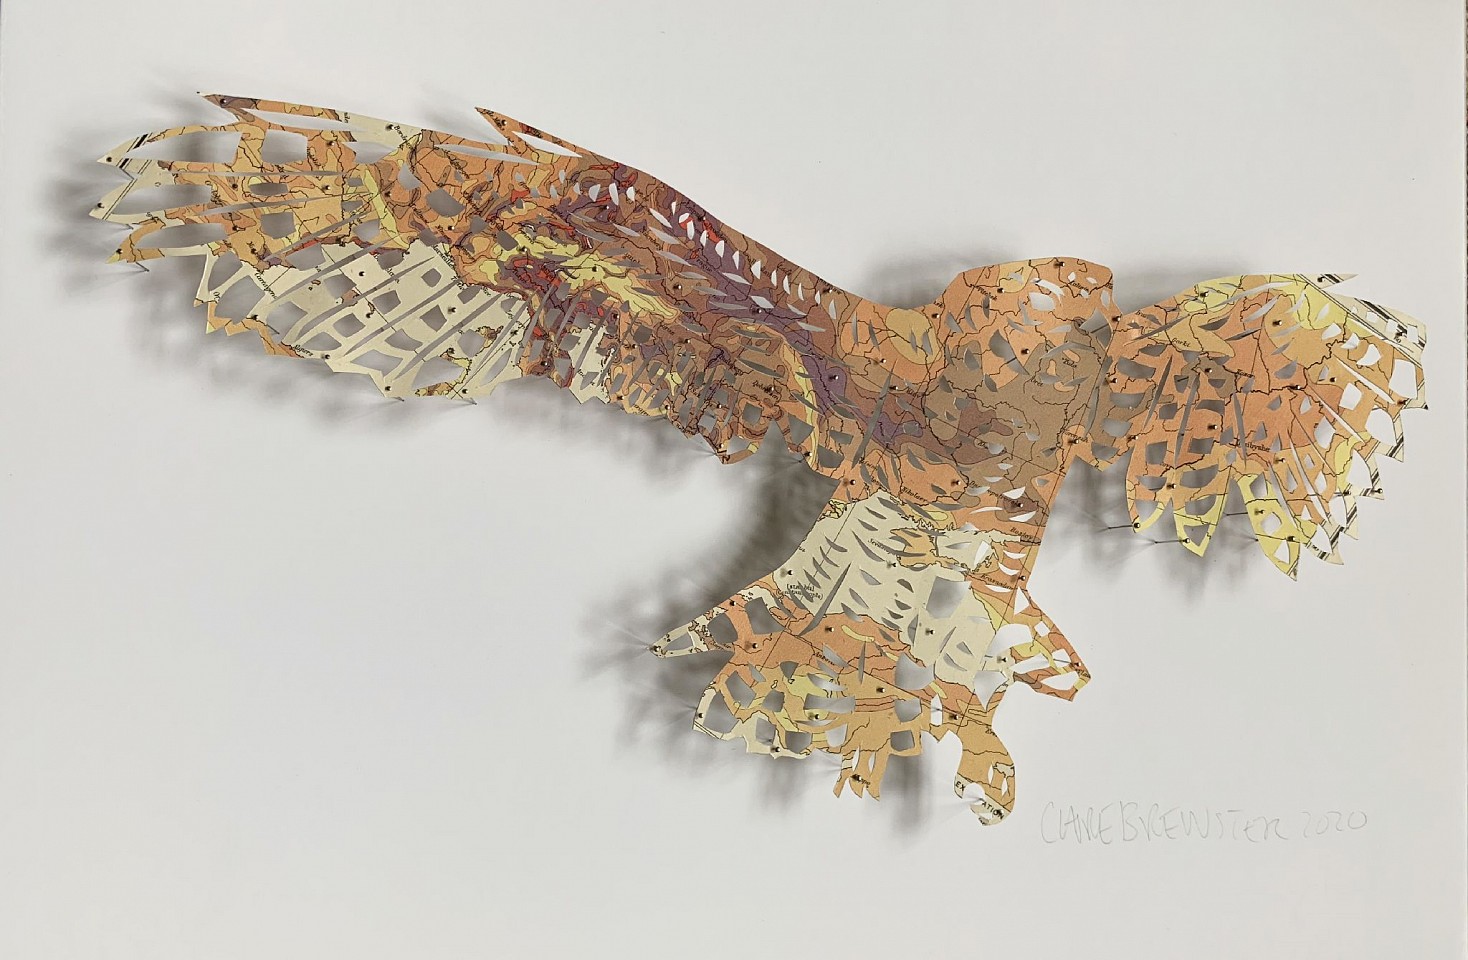 Claire Brewster, Where Eagles Fly, 2020
Page from Oxford Advance Atlas, 12 1/2 x 18 in.
SOLD
7490
&bull;